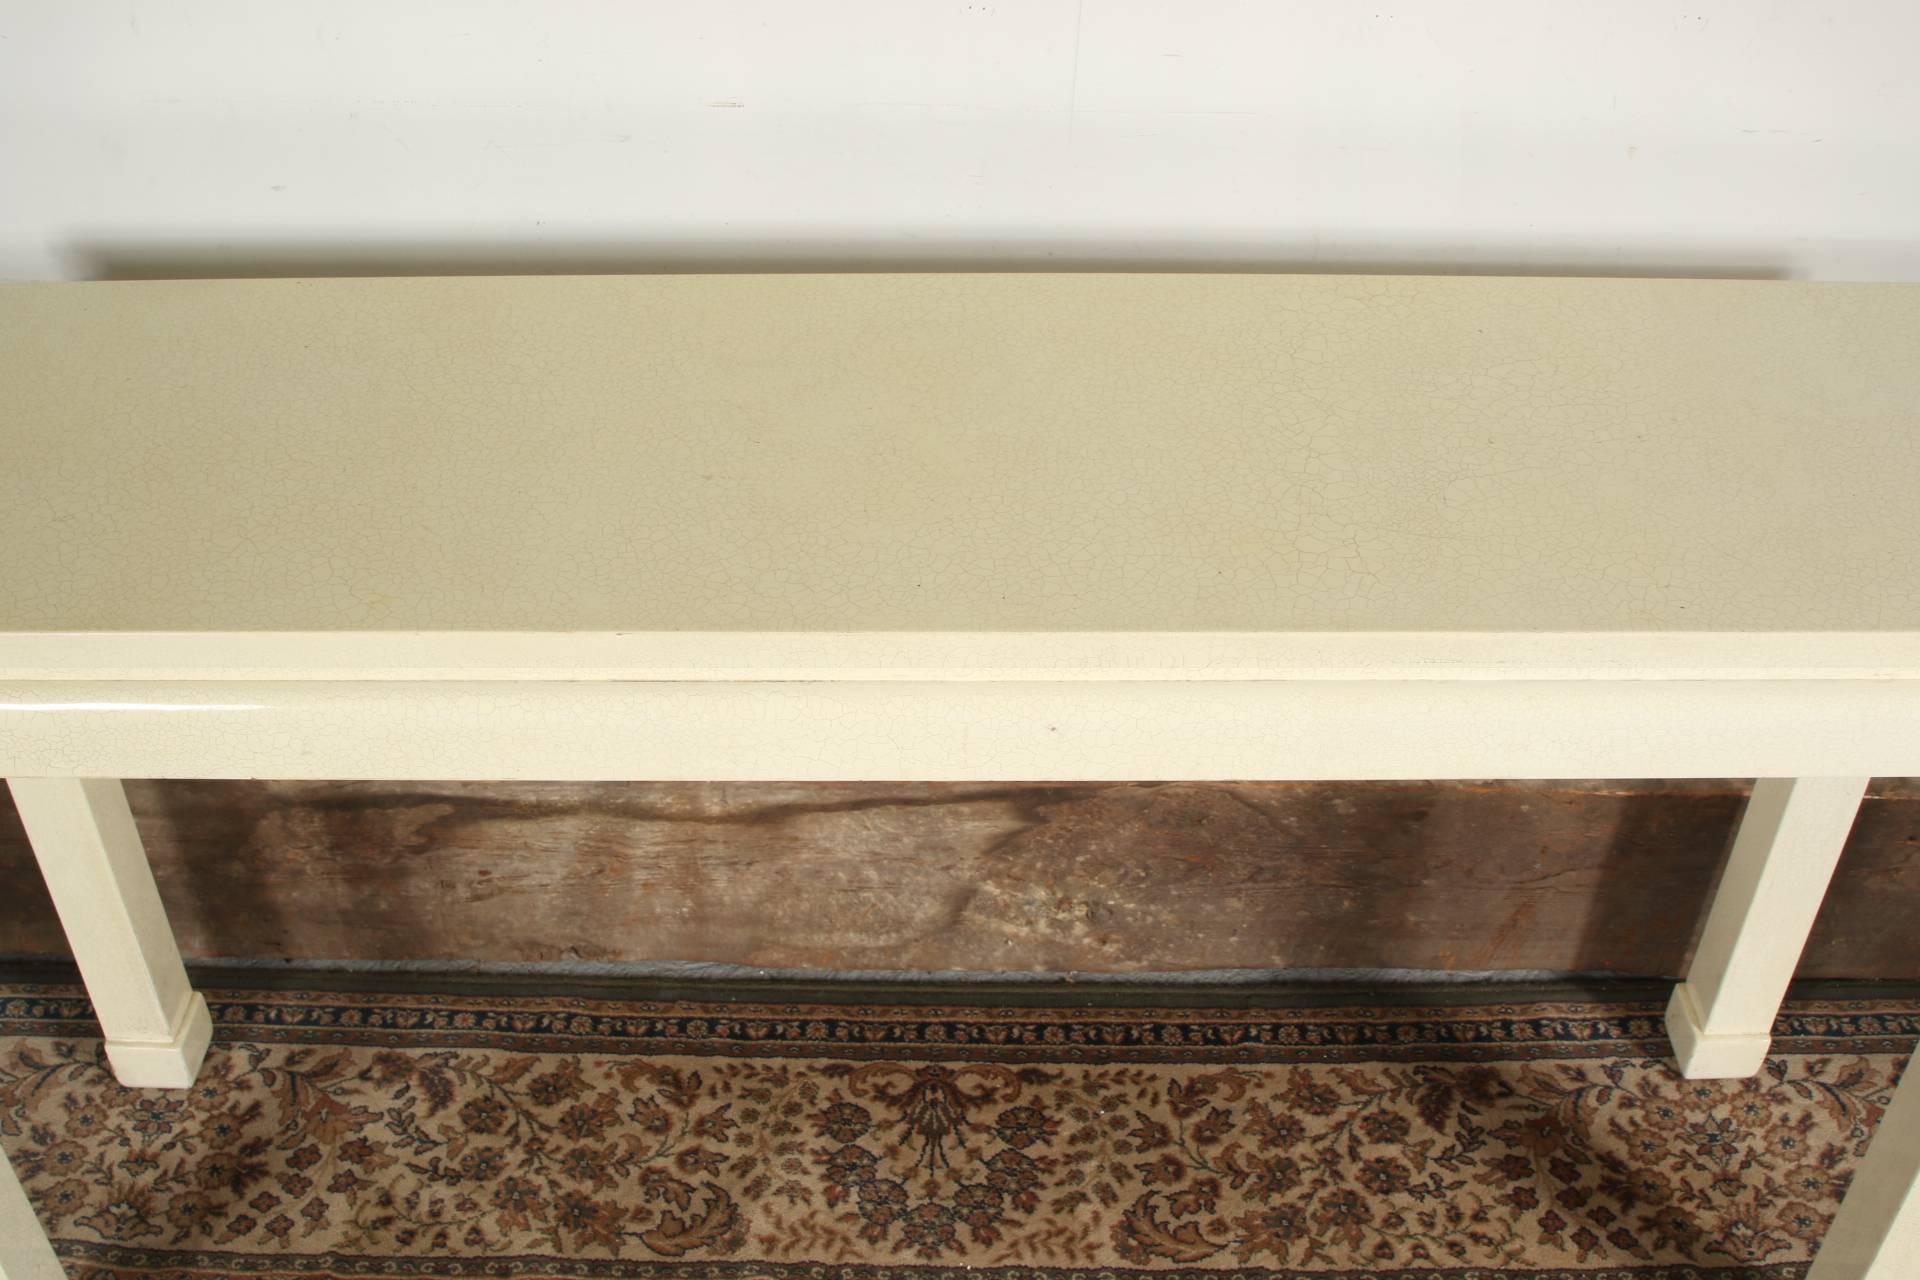 A modern console table in a cream crackle pattern laminate finish, the top over an inset apron, raised on tall legs with Chinese style block feet. 
Condition: Very good with a few chips to the laminate.